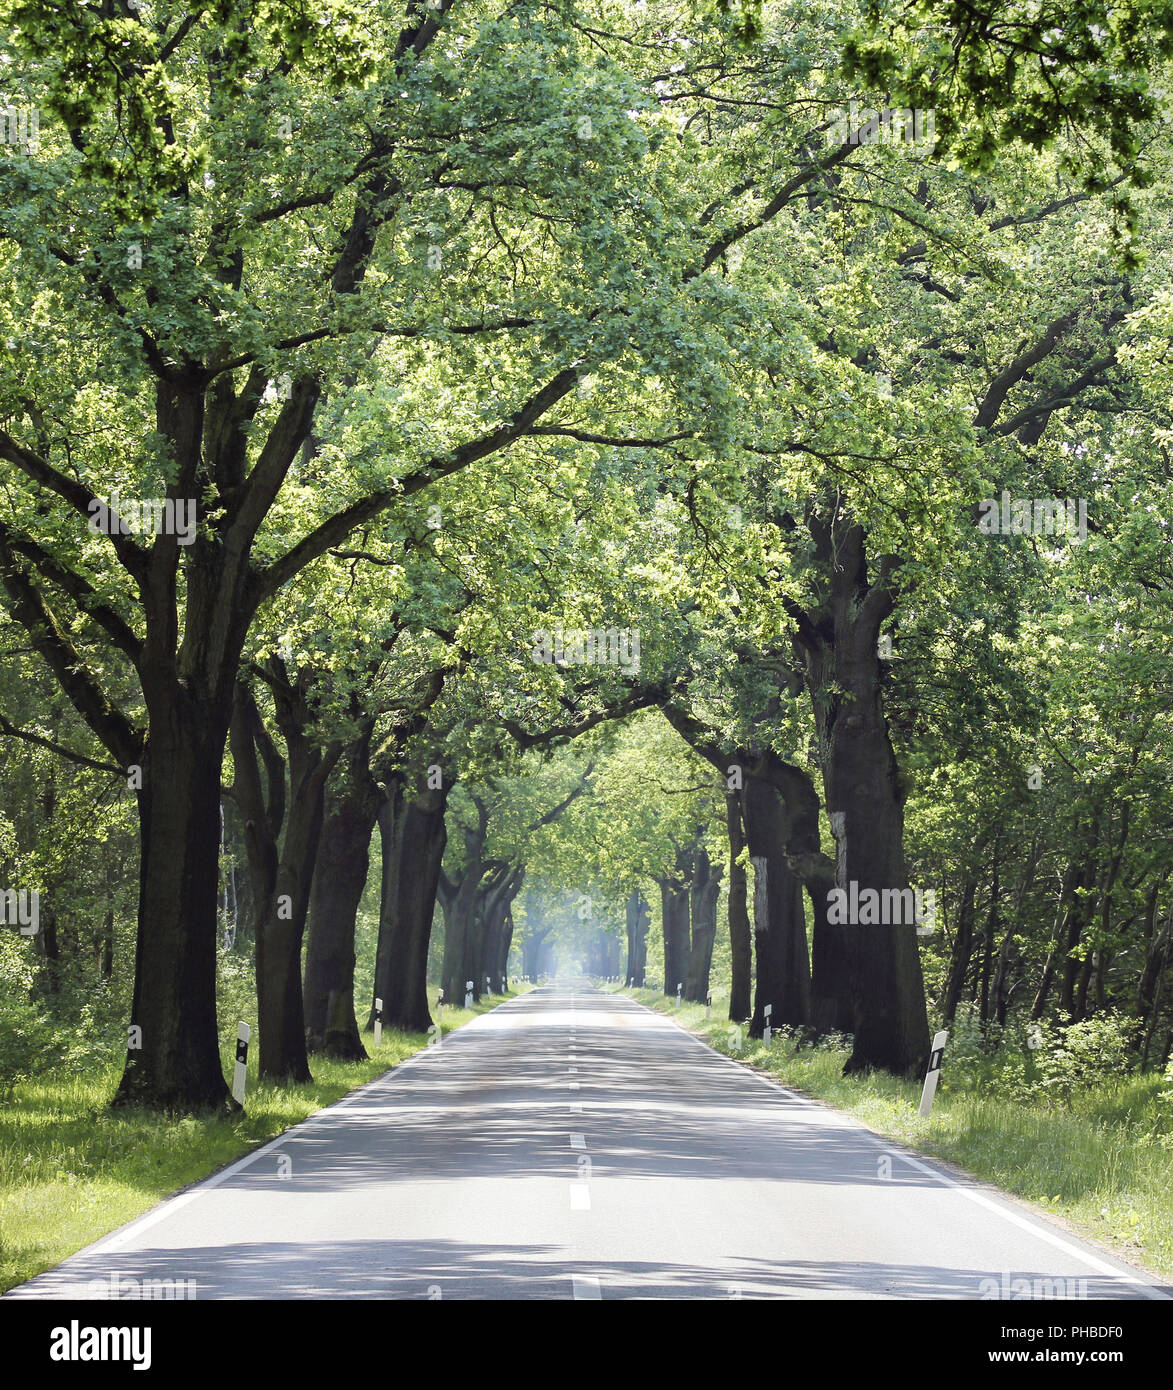 country road without traffic, tranquil scene Stock Photo